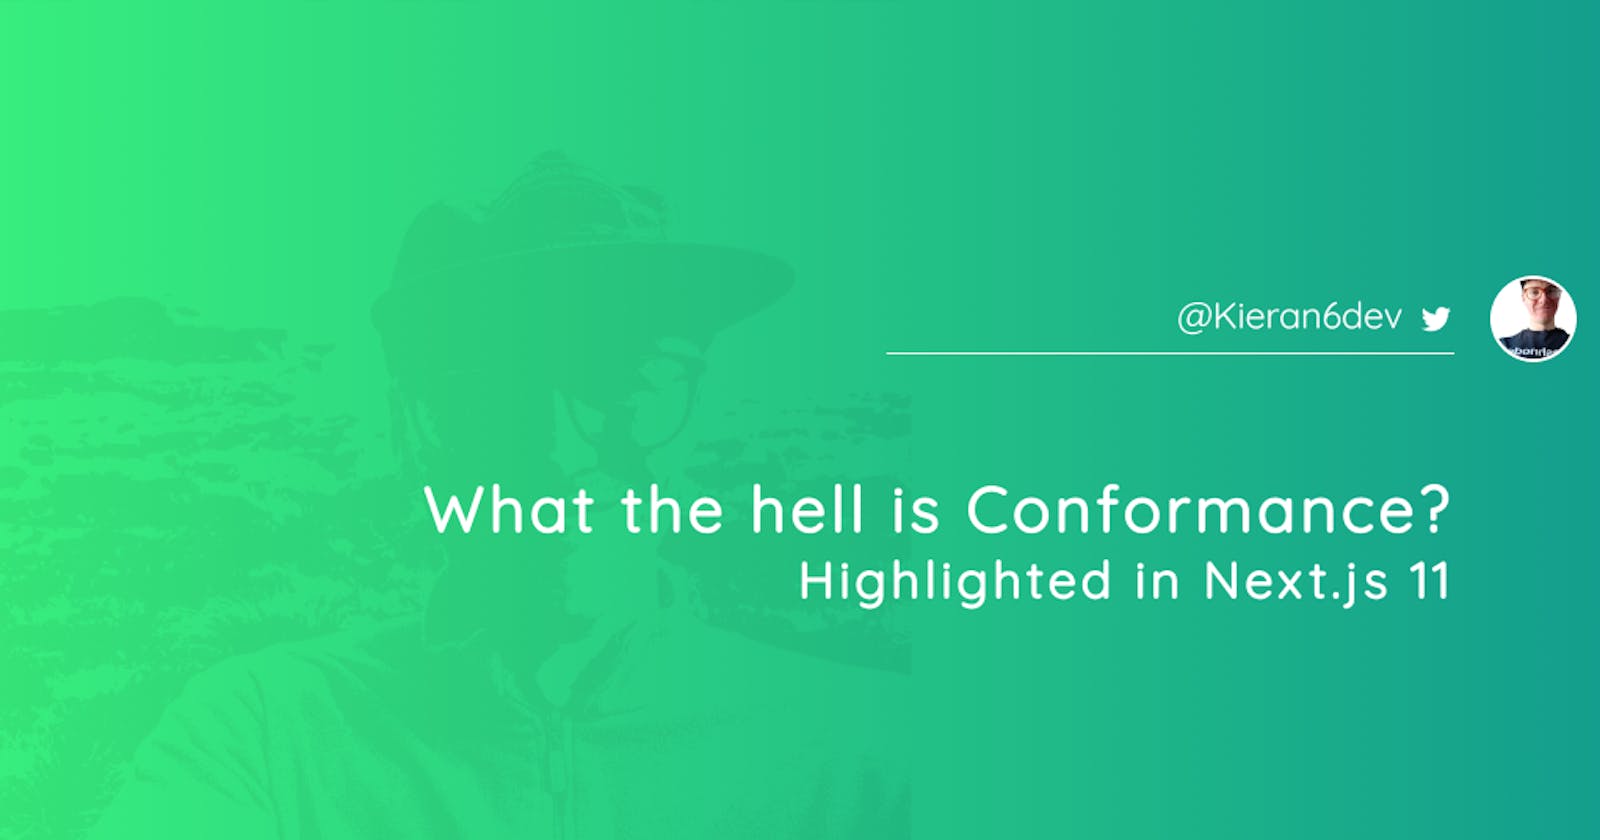 What the hell is Conformance? Highlighted in Next.js 11